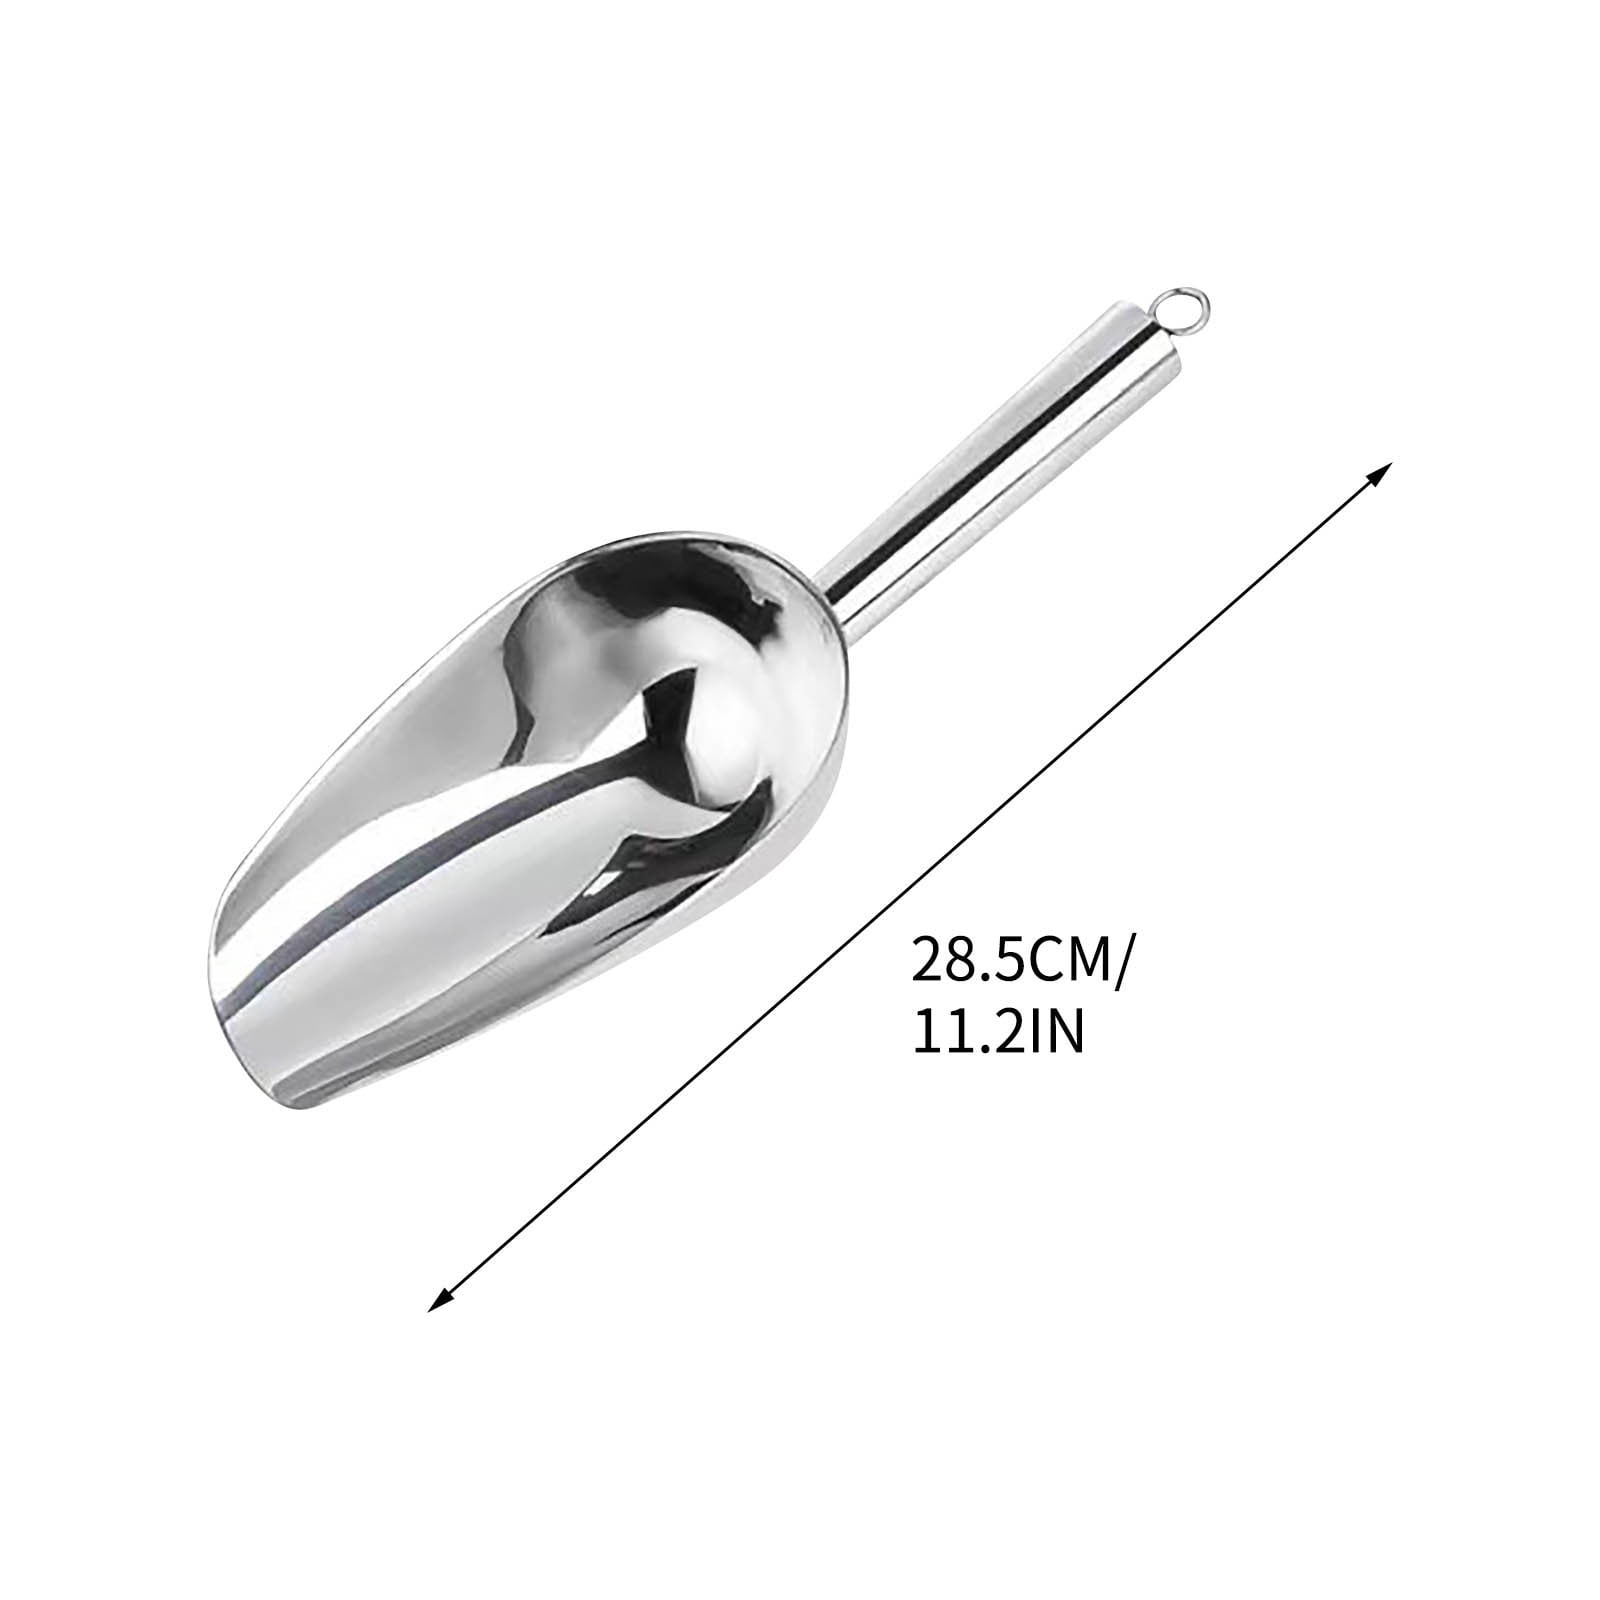  Metal Ice Scoop 8 Oz, Small Stainless Steel Ice scooper for Ice  Maker Ice Bucket Kitchen Freezer Bar Party Wedding, Multipurpose for  Popcorn Scoop,Flour Scoop,Dog Food Scoop (8 OZ, Silver): Home